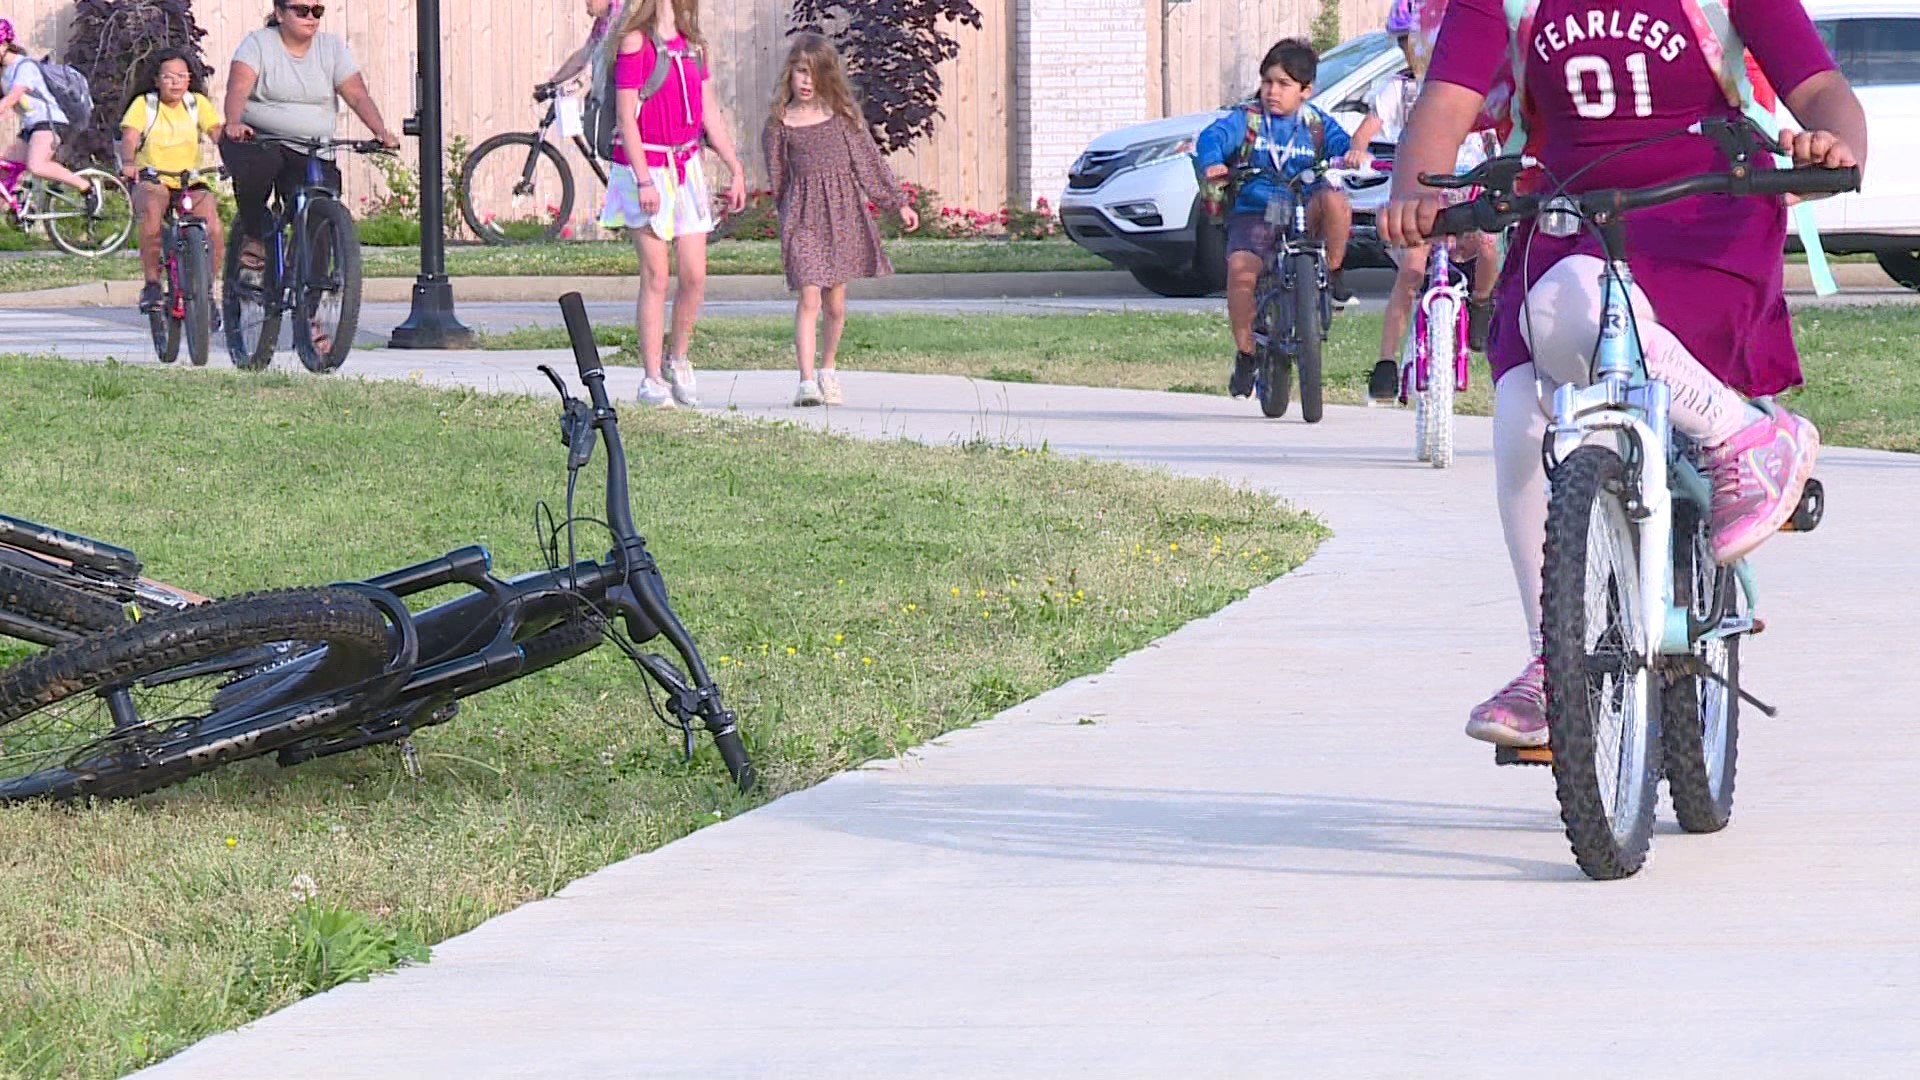 The parent-led bike train gets kids from a subdivision with no bus route safely to school.